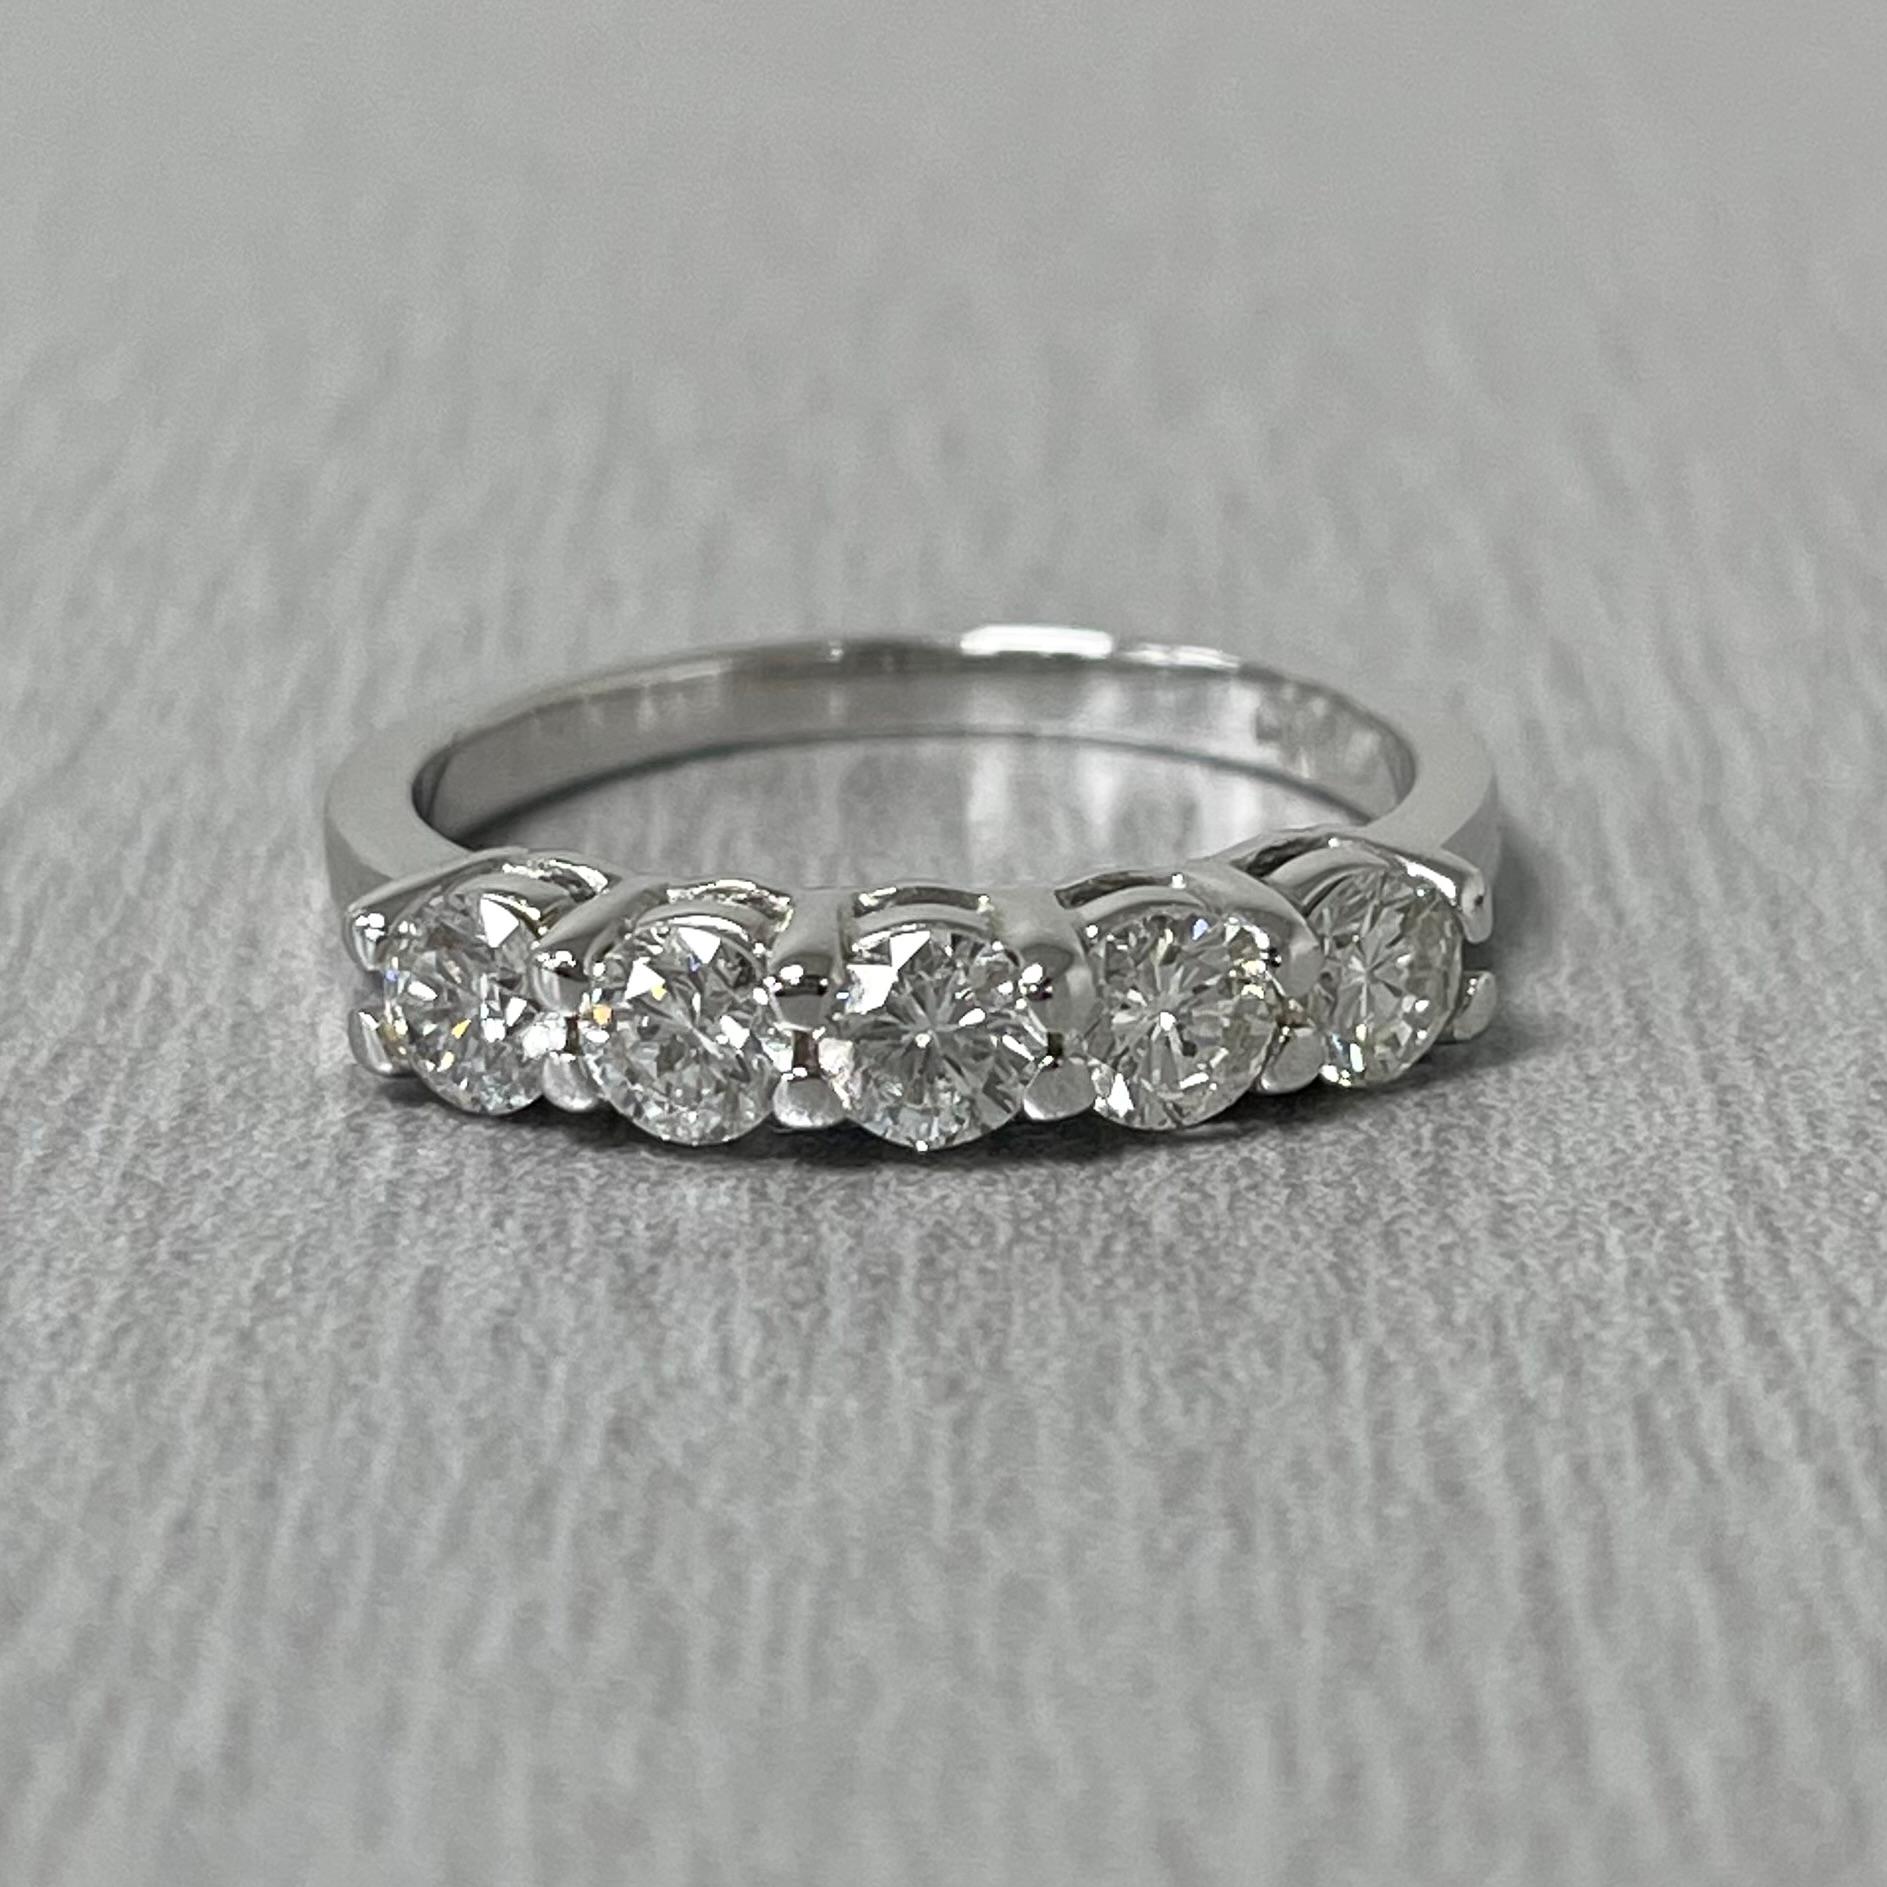 Beauvince 5 Stone Diamond Ring '0.85 Ct Diamonds' in White Gold In New Condition For Sale In New York, NY